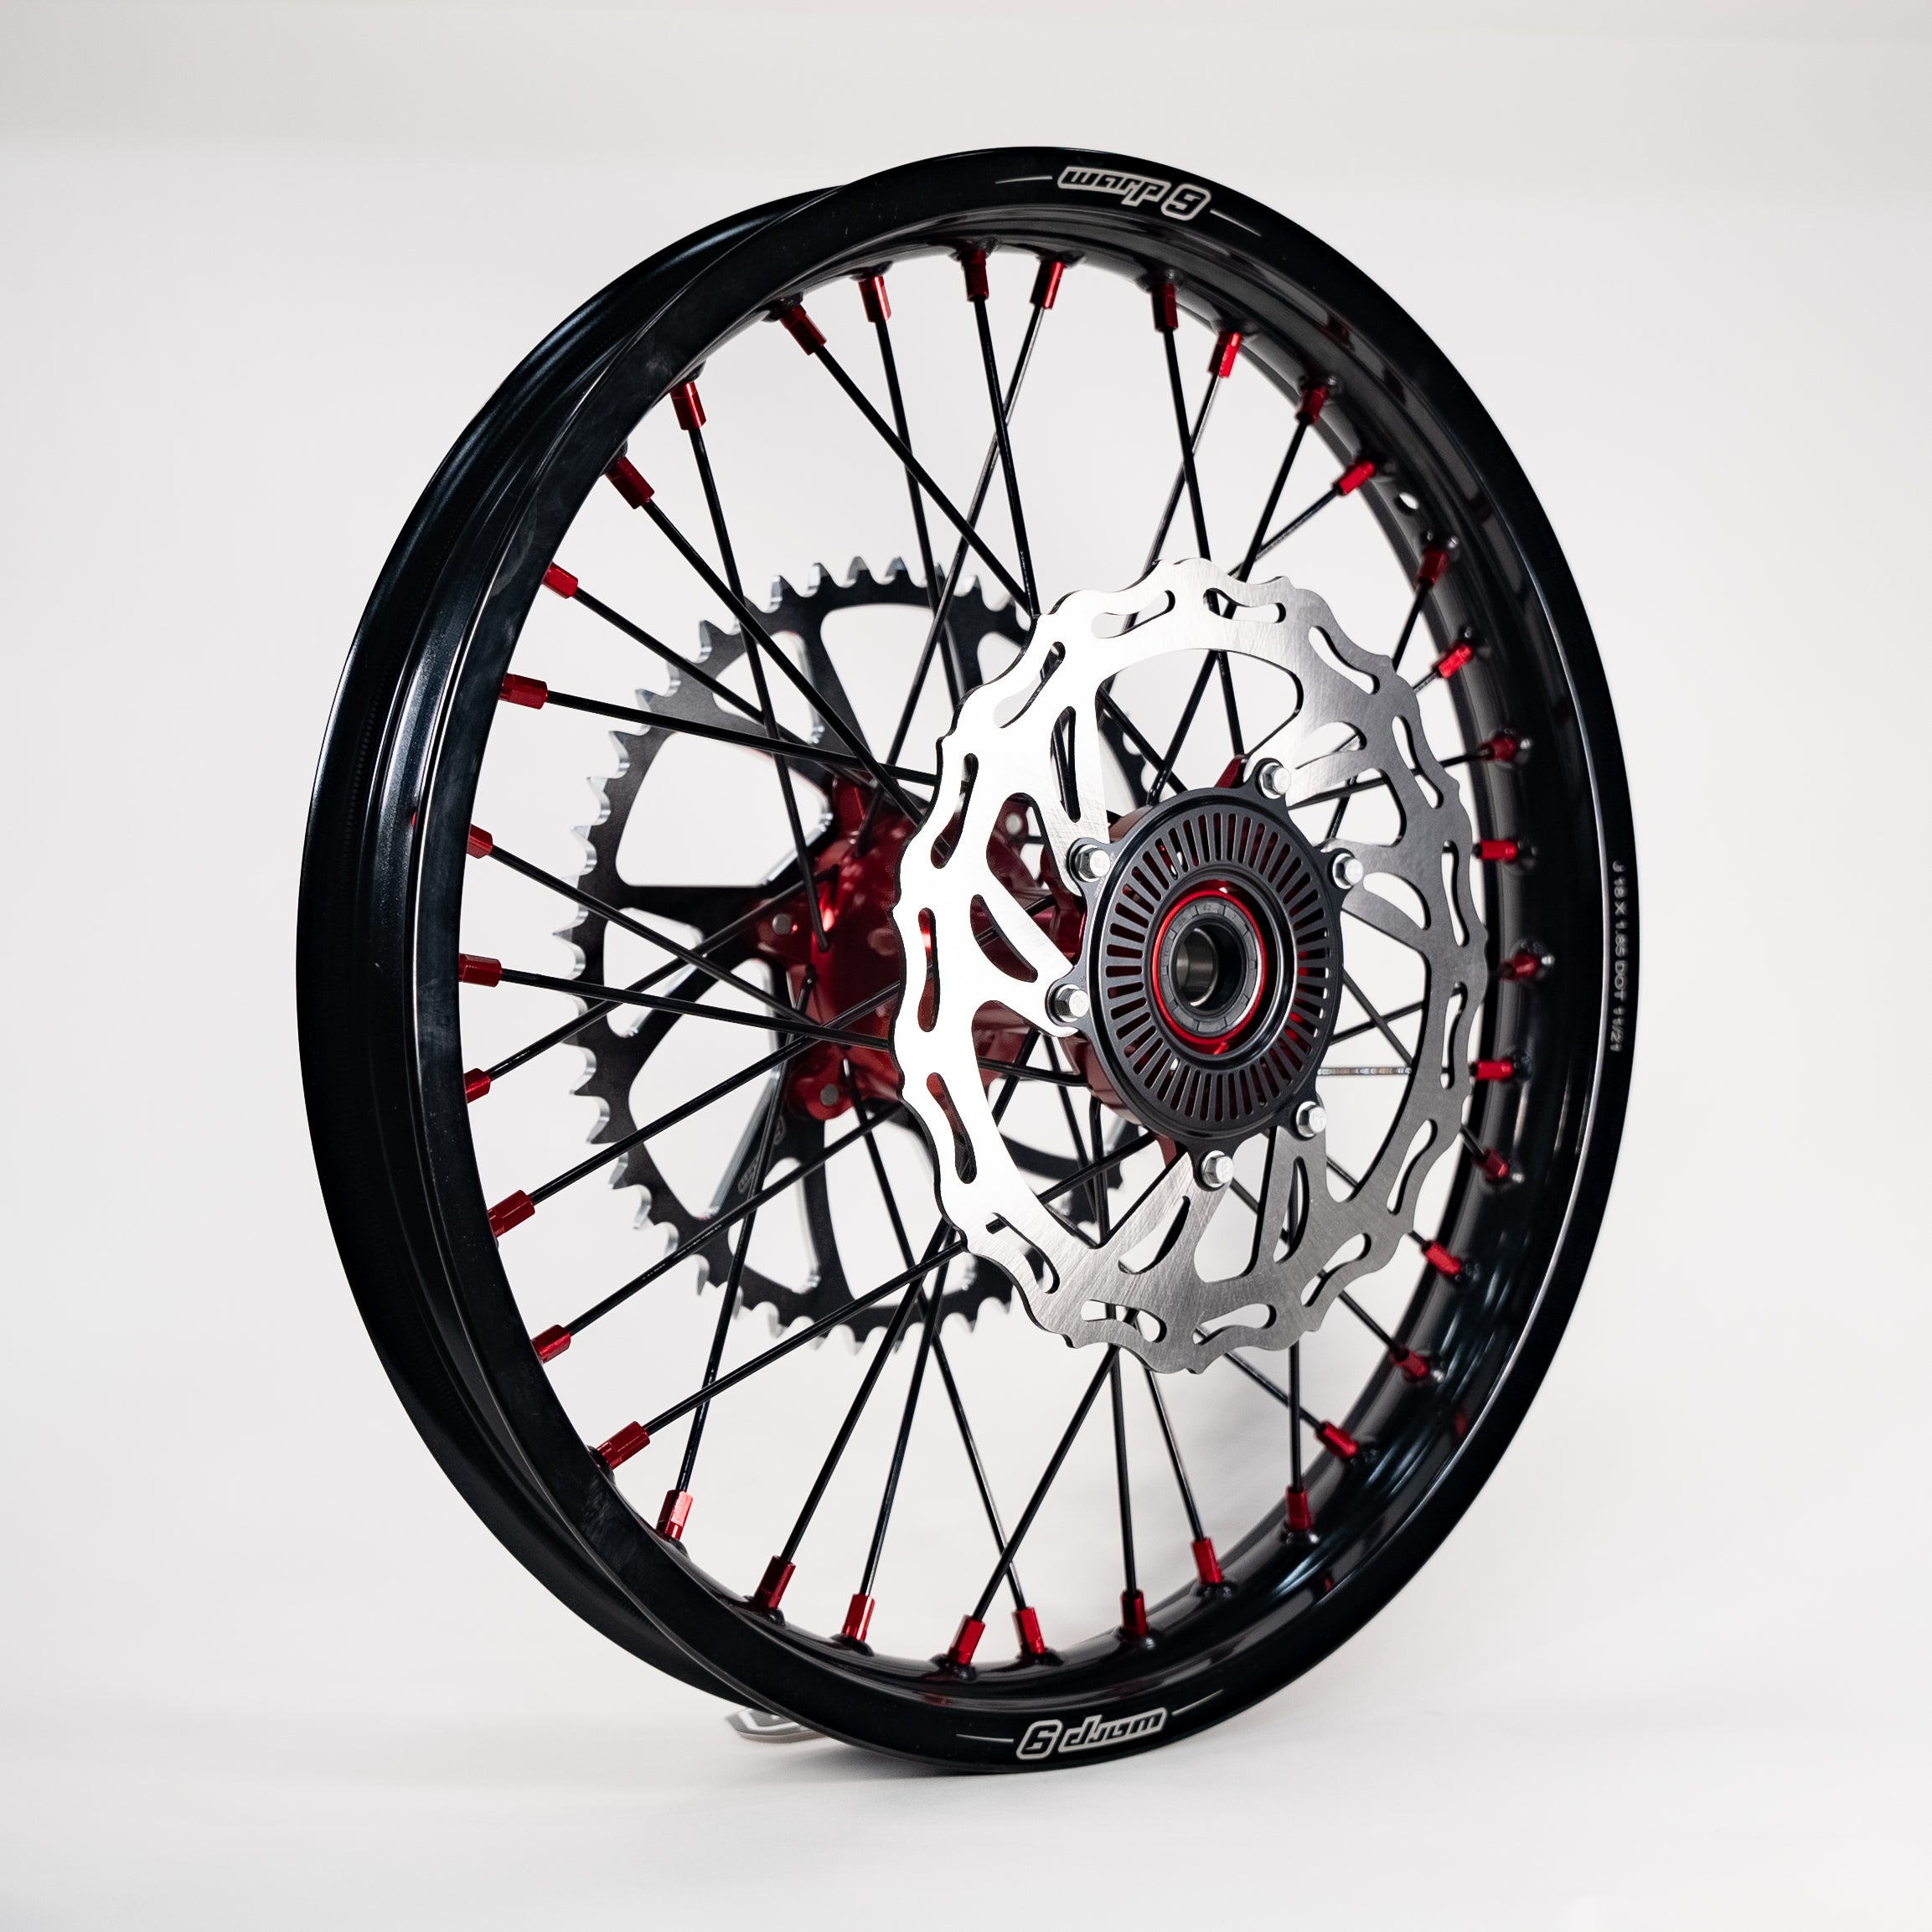 18/21 Complete Wheel & Tire Combo - Warp 9 for Surron Light Bee and E Ride ProSS